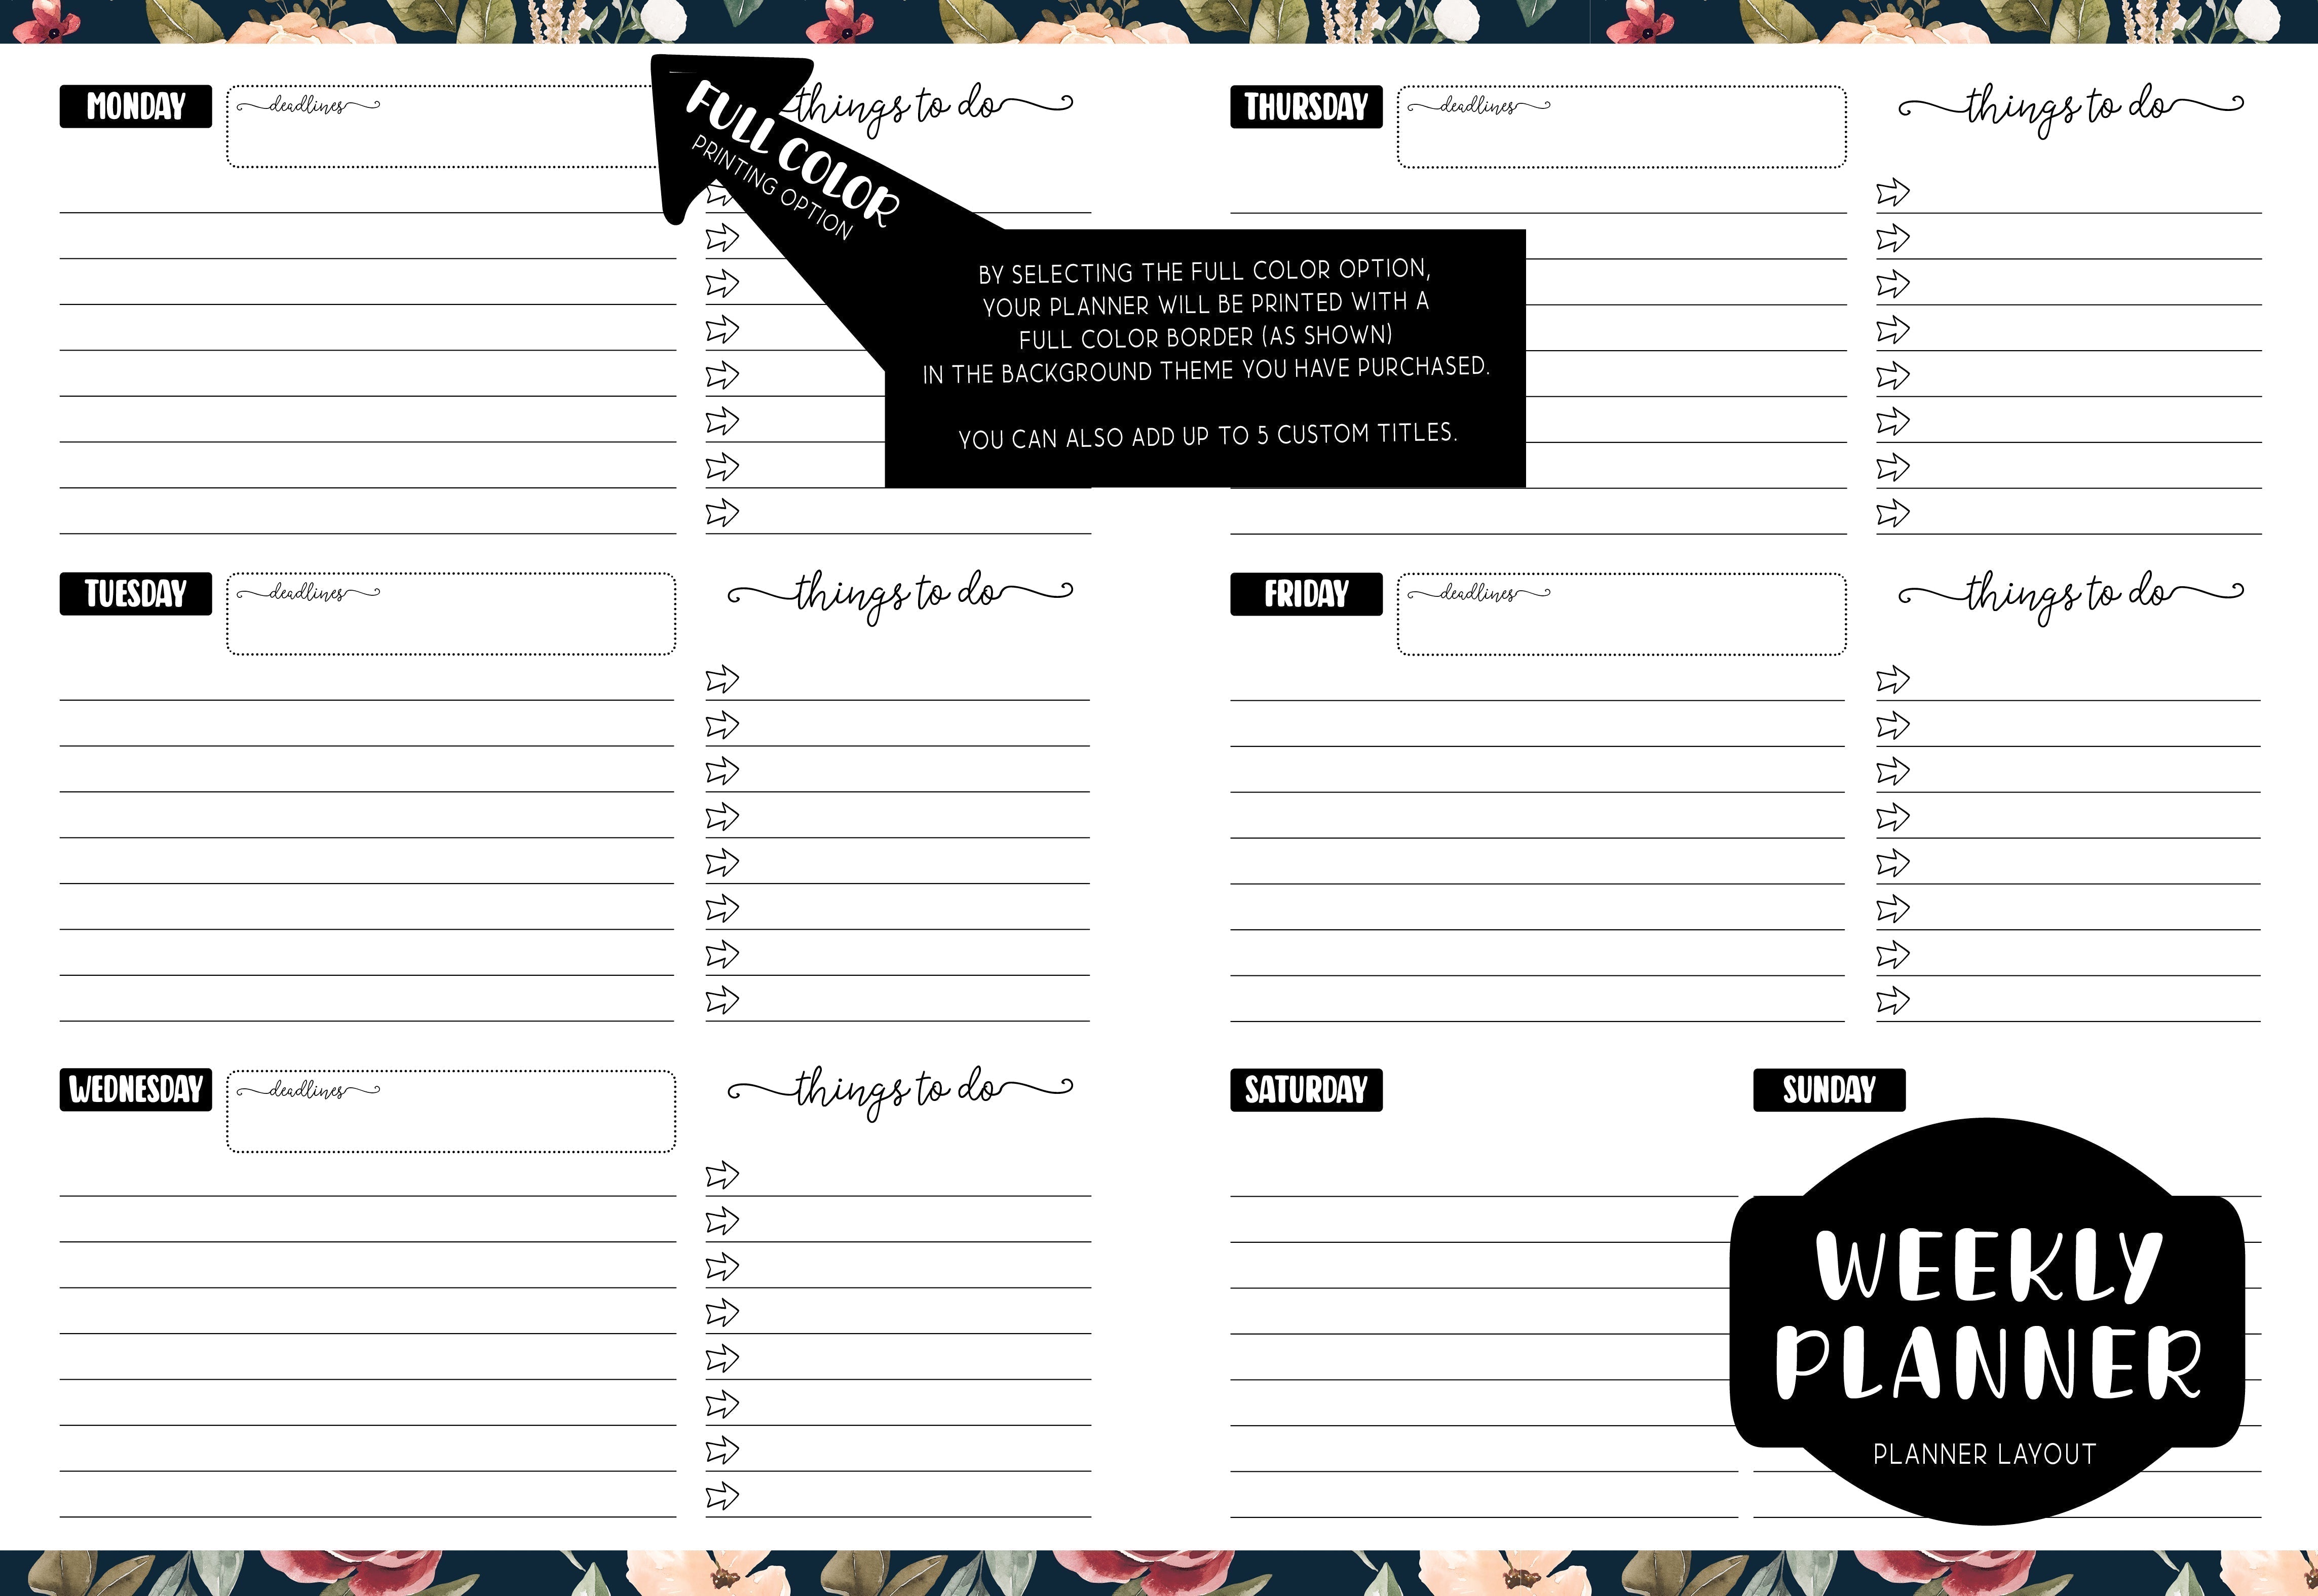 Weekly Planner - STYLIST COLLAGE